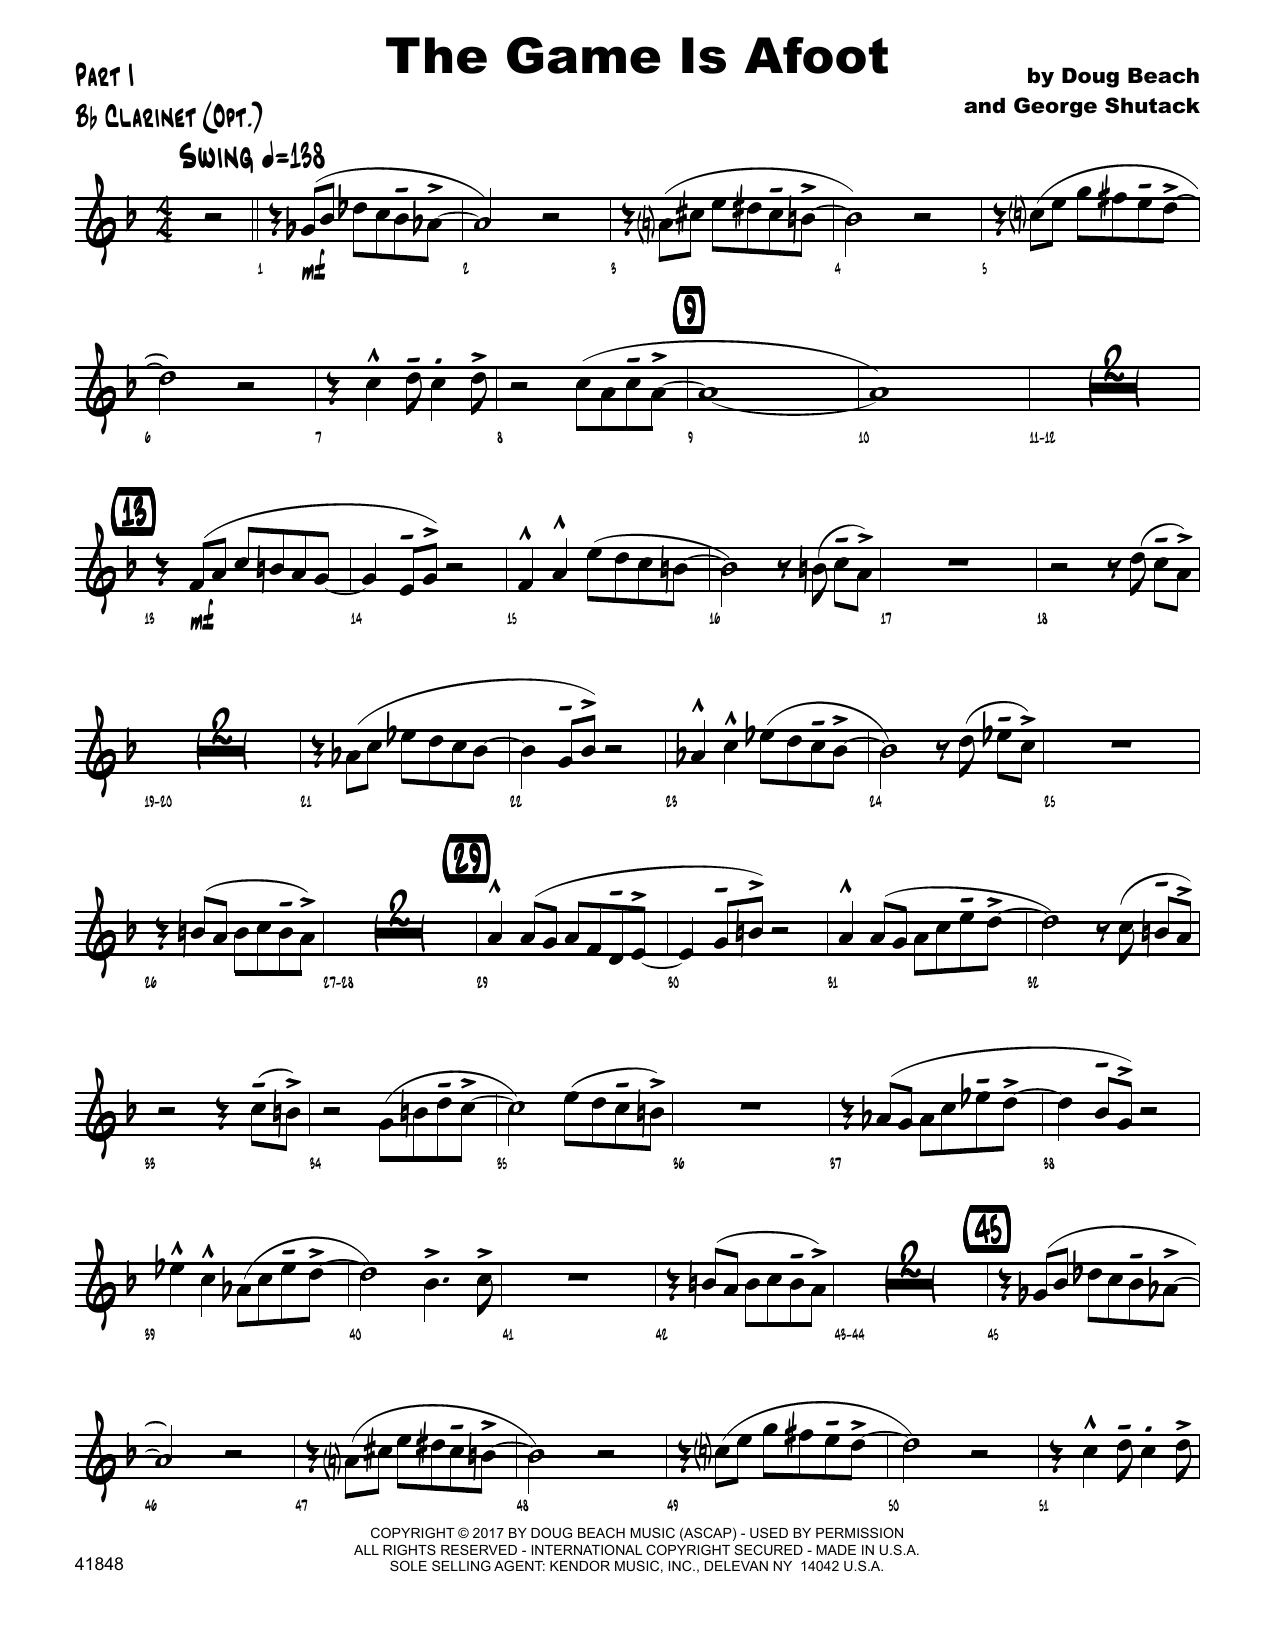 Download Doug Beach & George Shutack The Game Is Afoot - Bb Clarinet Sheet Music